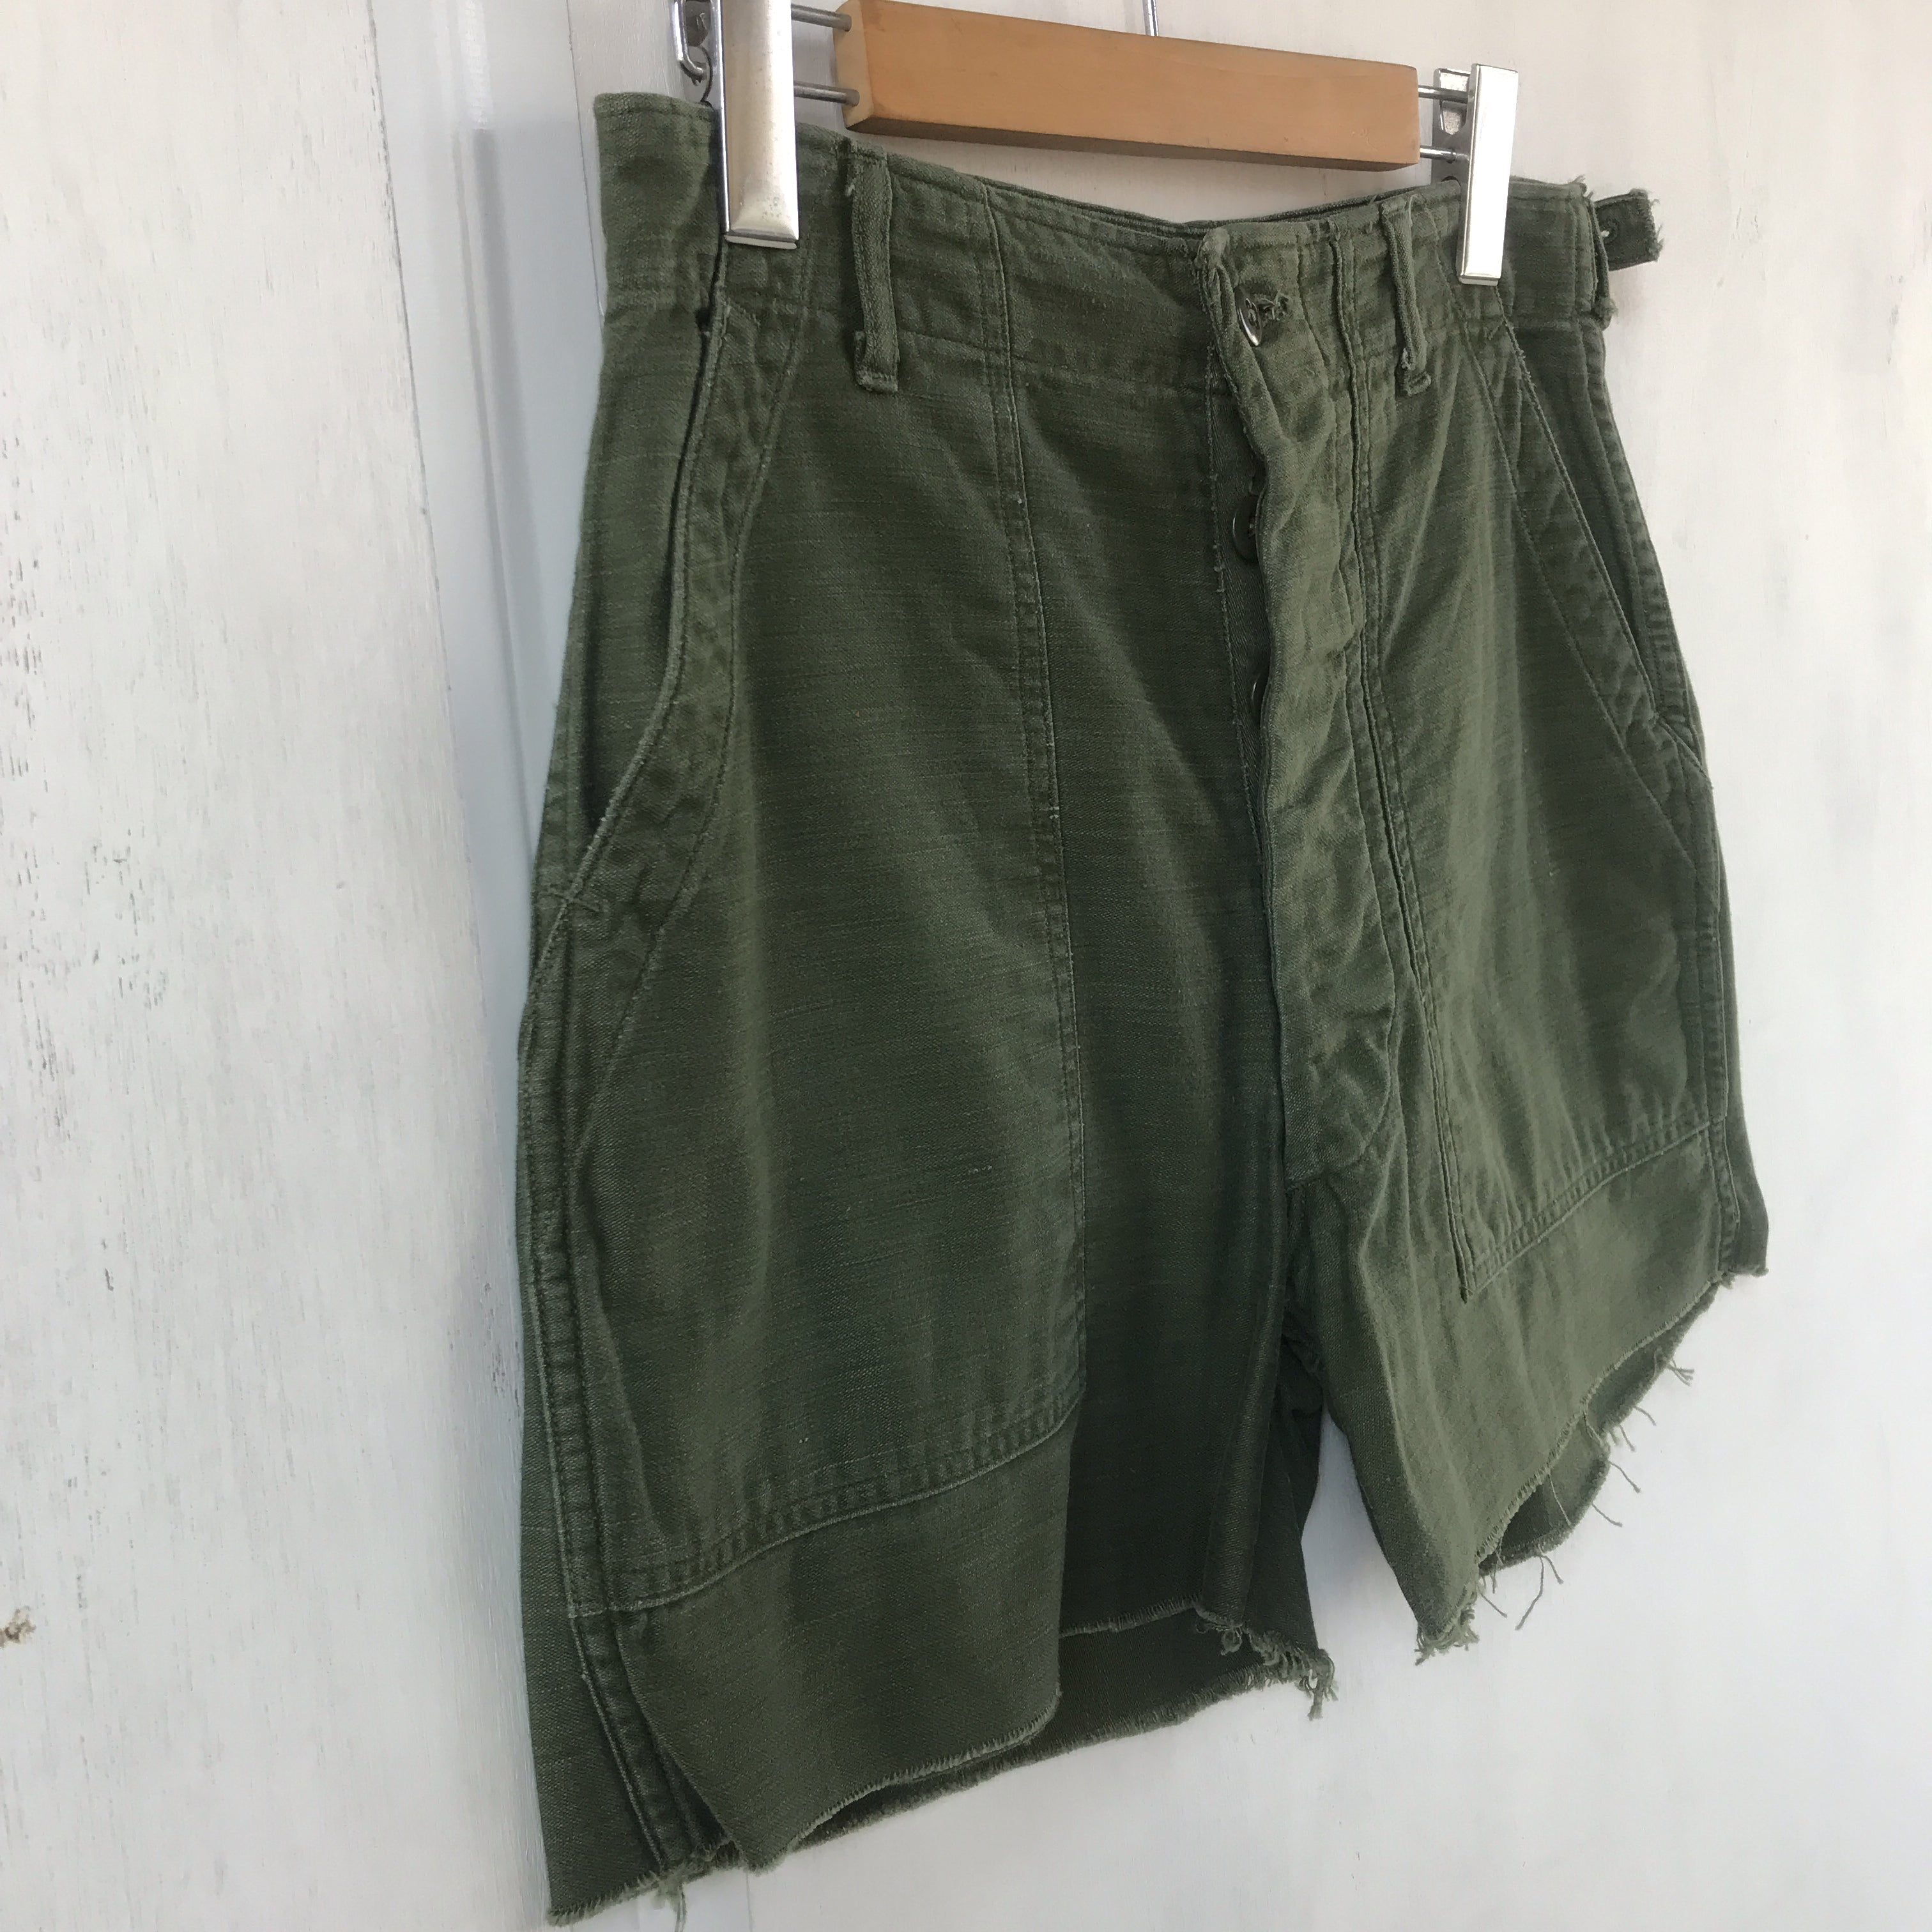 [ ONLY ONE ! ] CUT OFF 64's UTILITY SHORTS / Mr.Clean Select